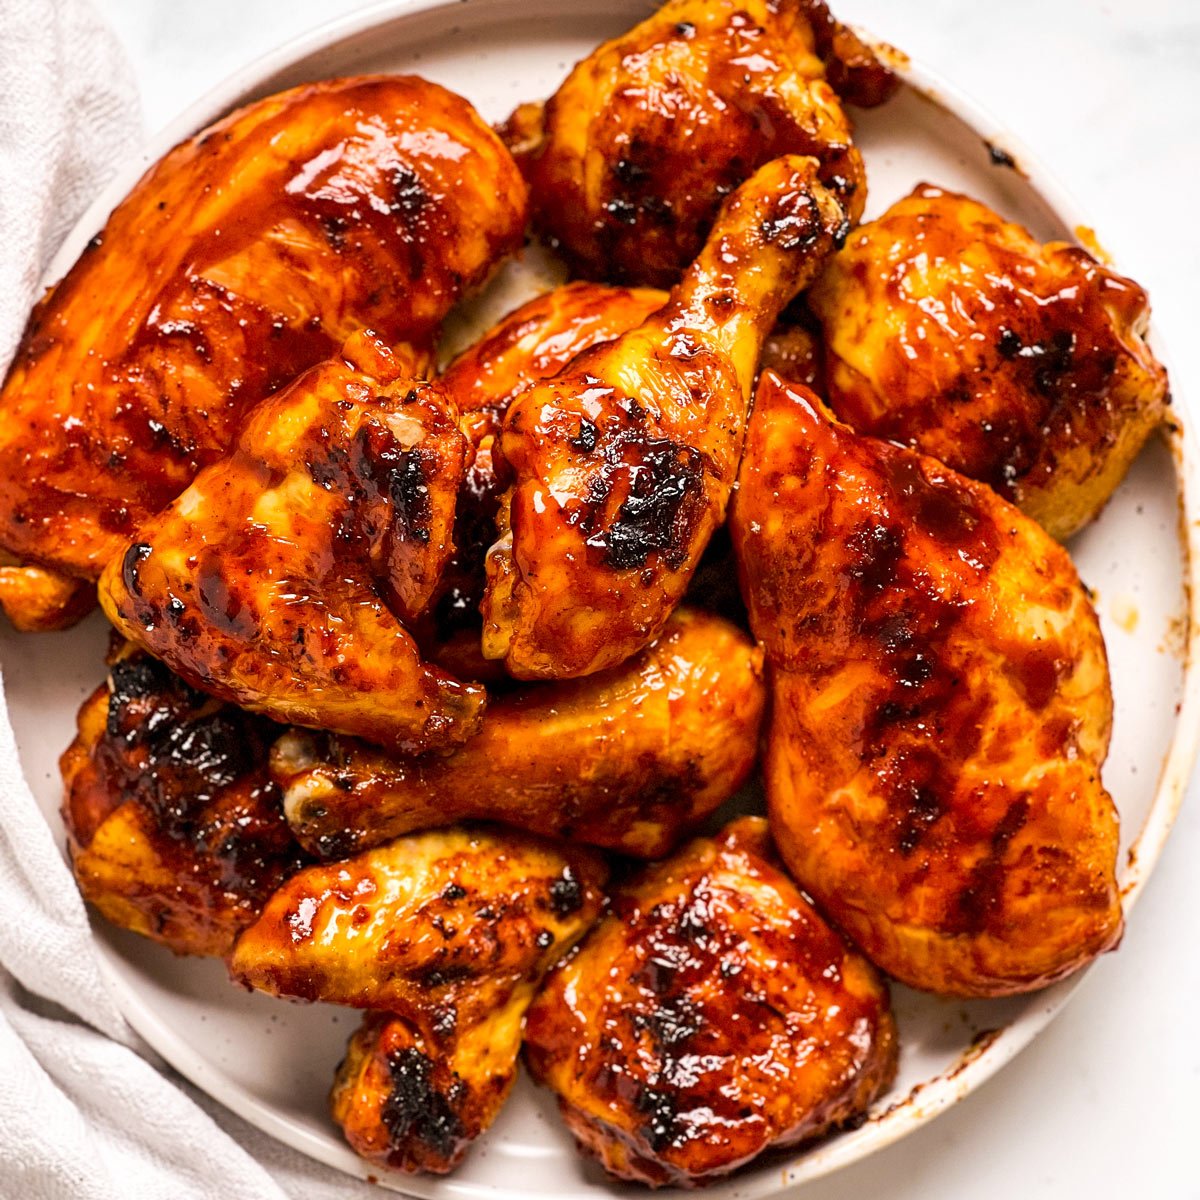 Best The BBQ - Nothings Savory Chicken Recipe